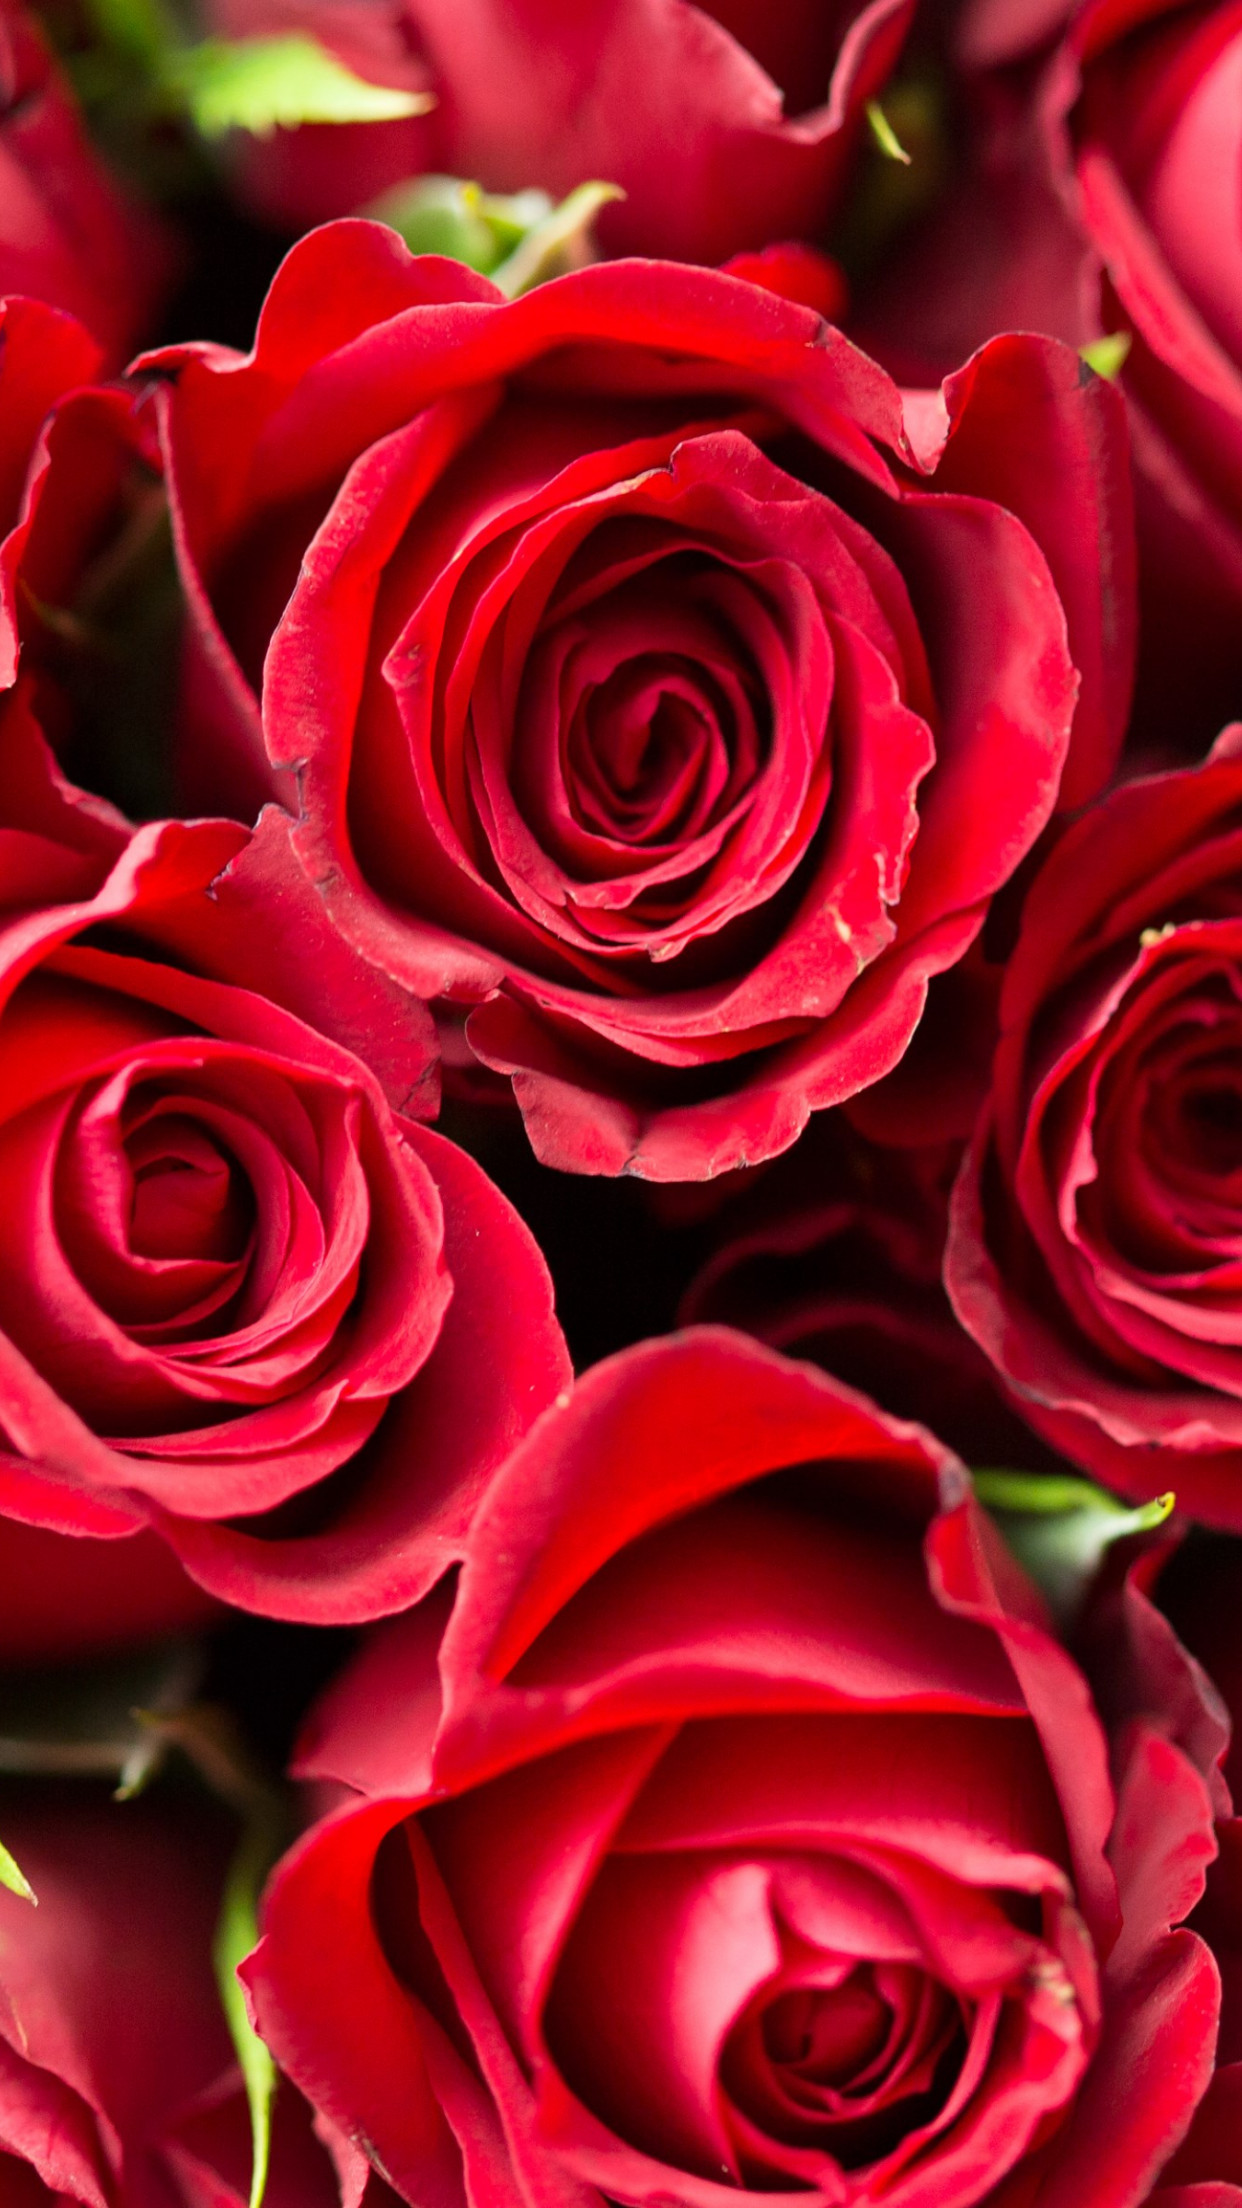 Lots of red roses wallpaper 1242x2208